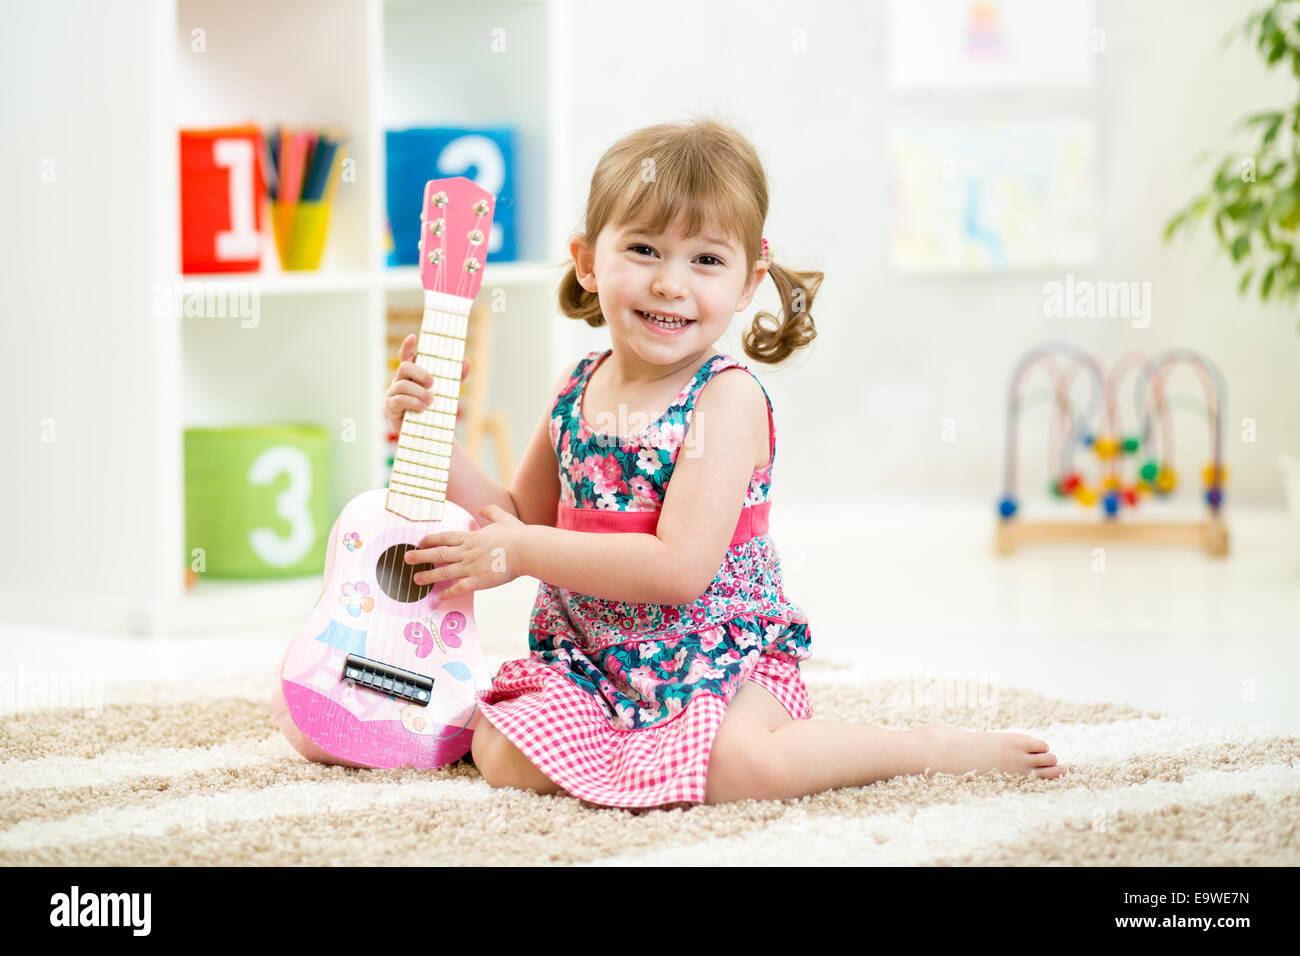 little girl with guitar toy gift Stock Photo